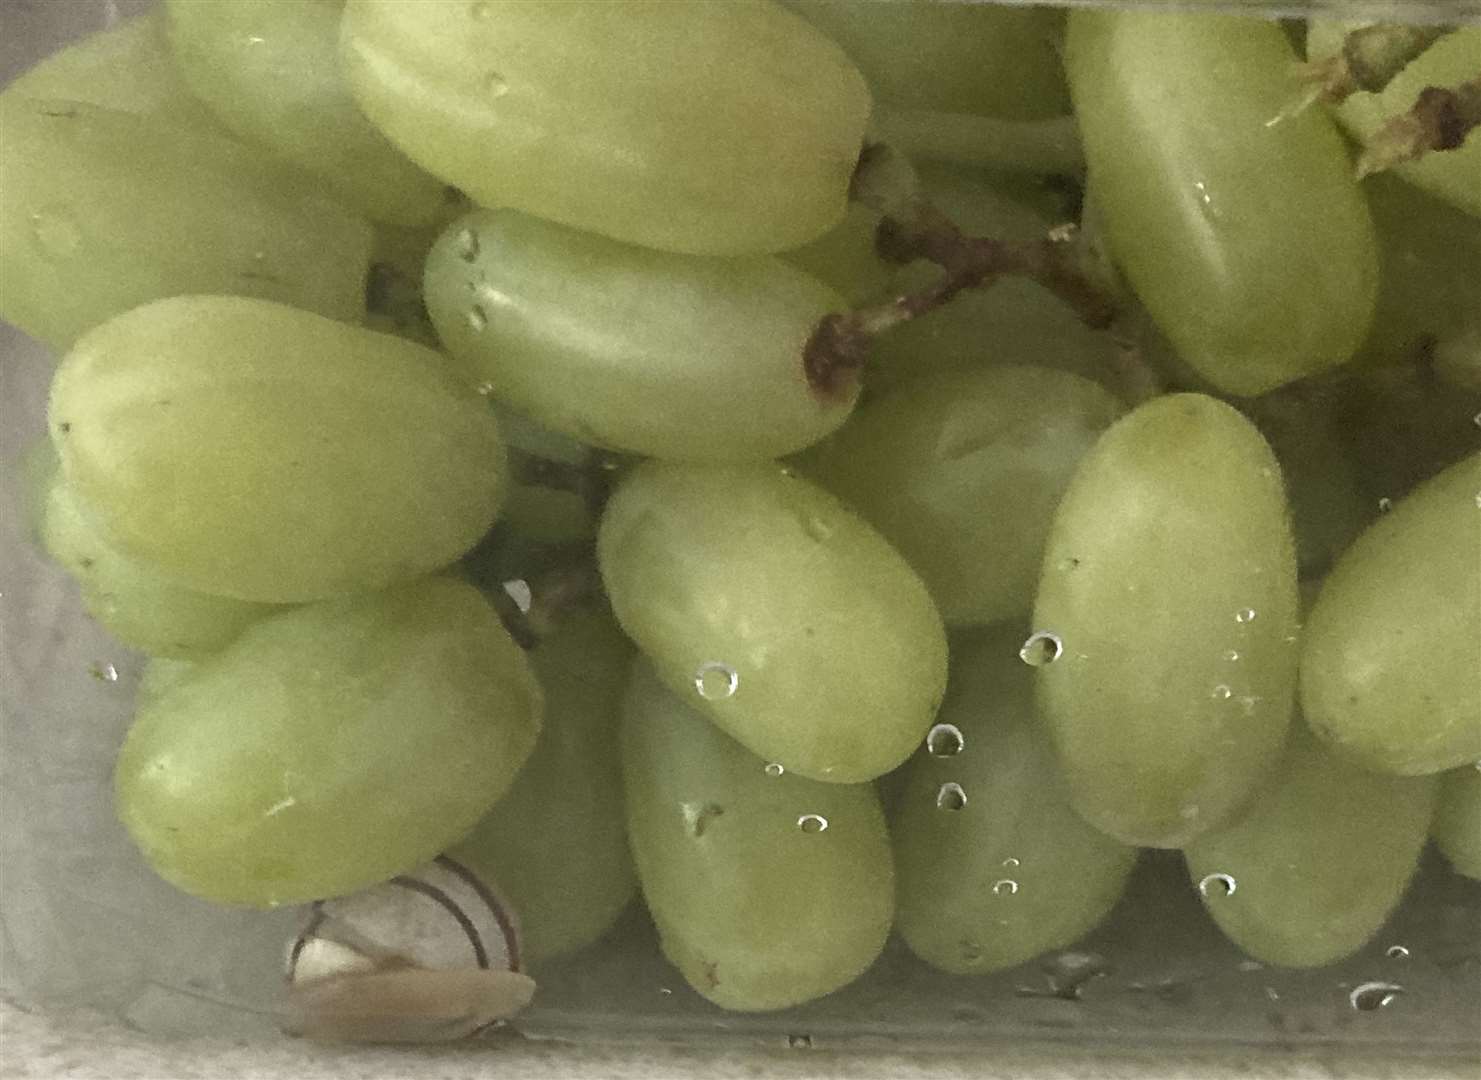 A snail was found in a pack of Sainsbury's grapes